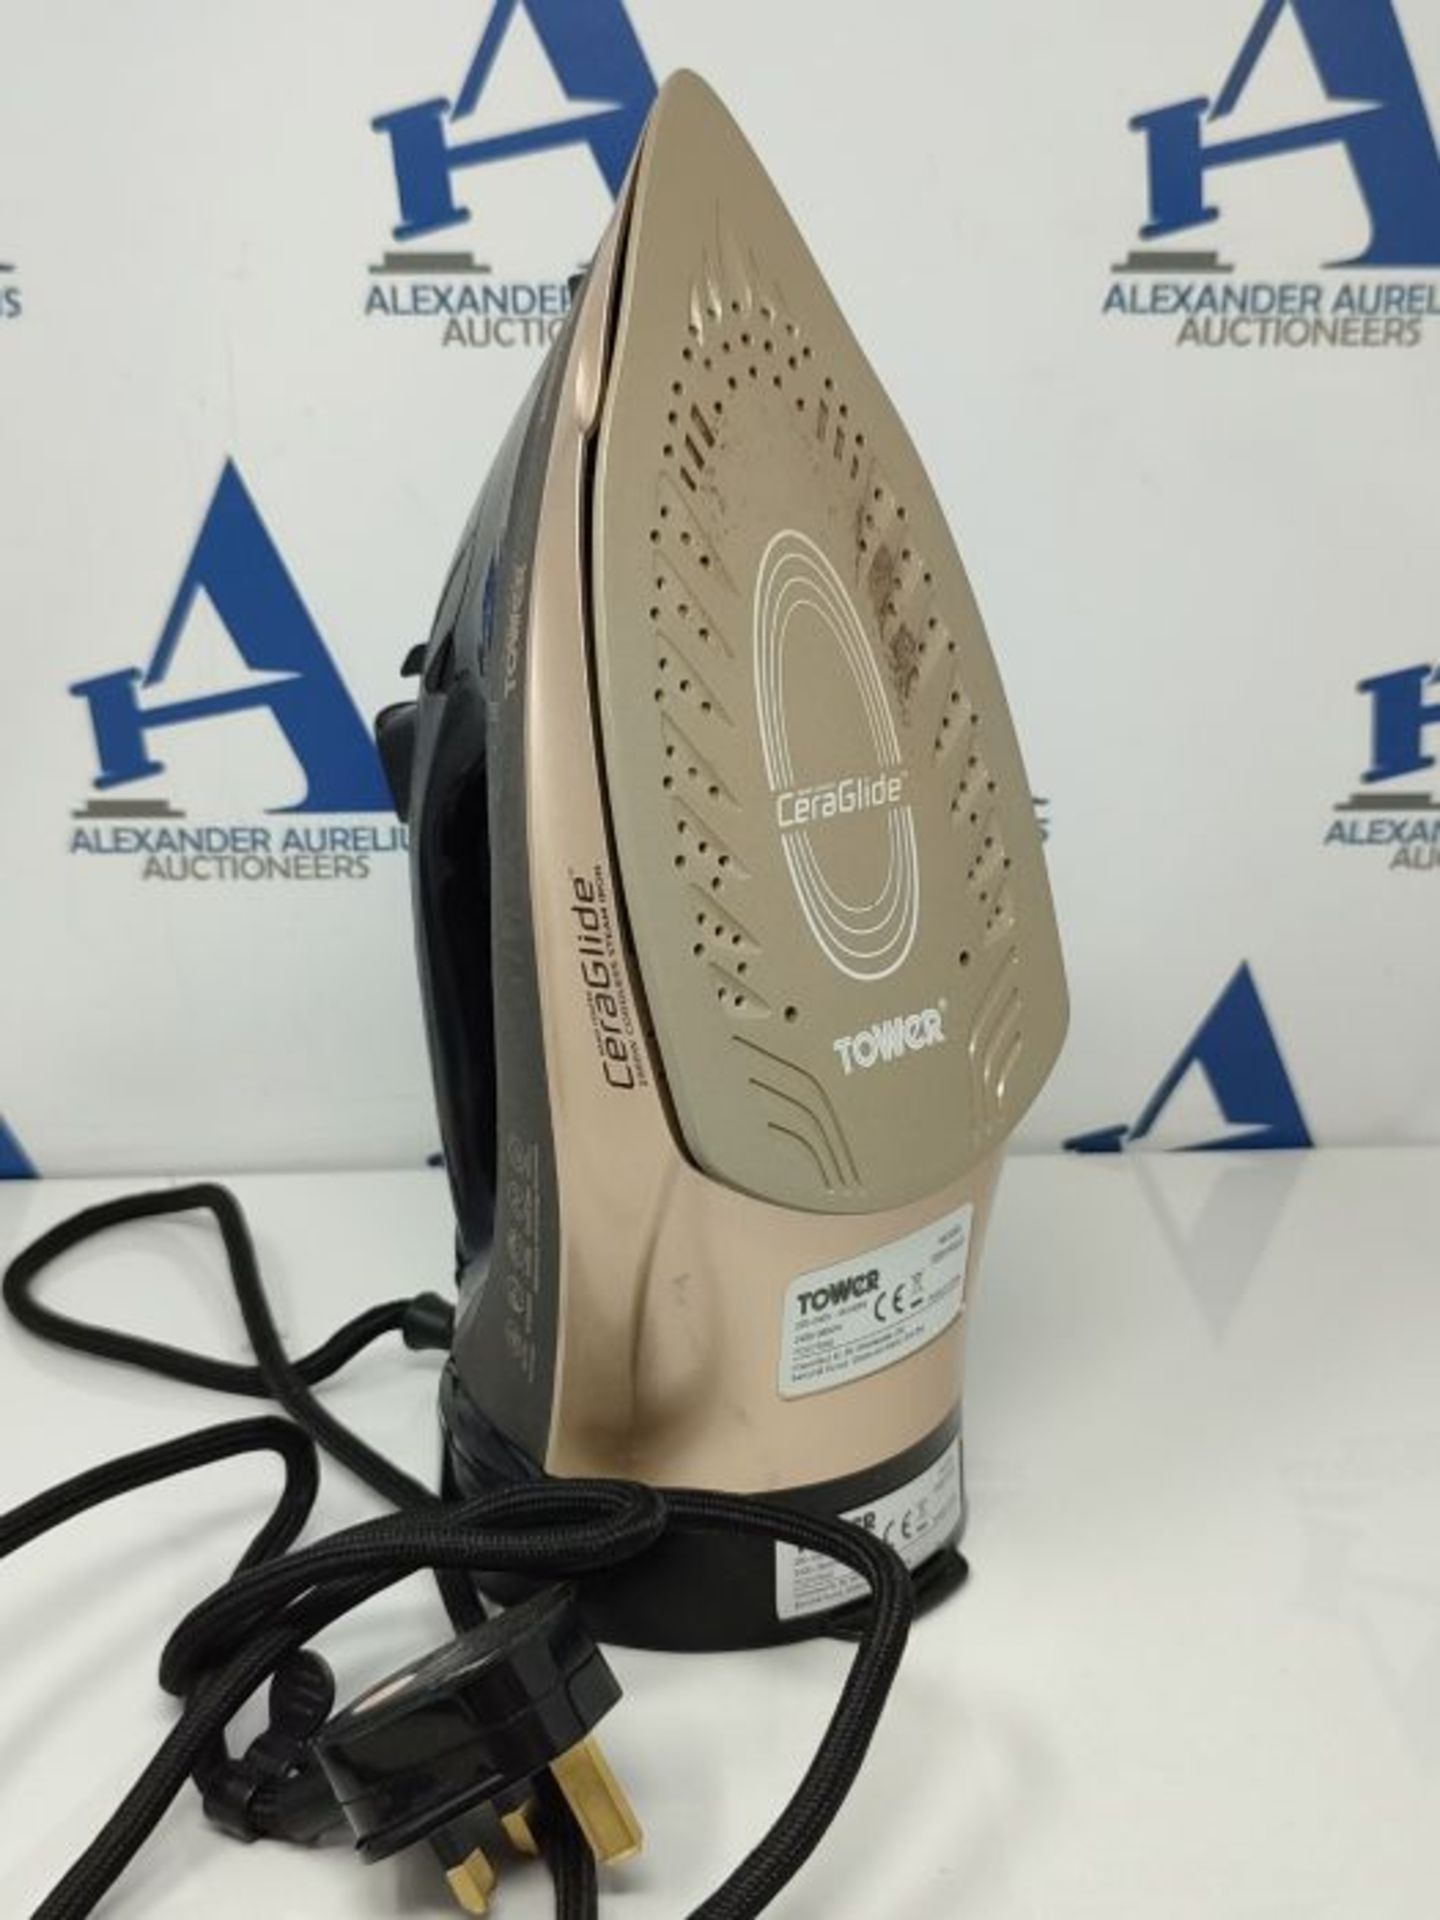 Tower Ceraglide T22019GLD 2 in 1 Cord or Cordless Steam Iron with Ceramic Soleplate, A - Image 3 of 3